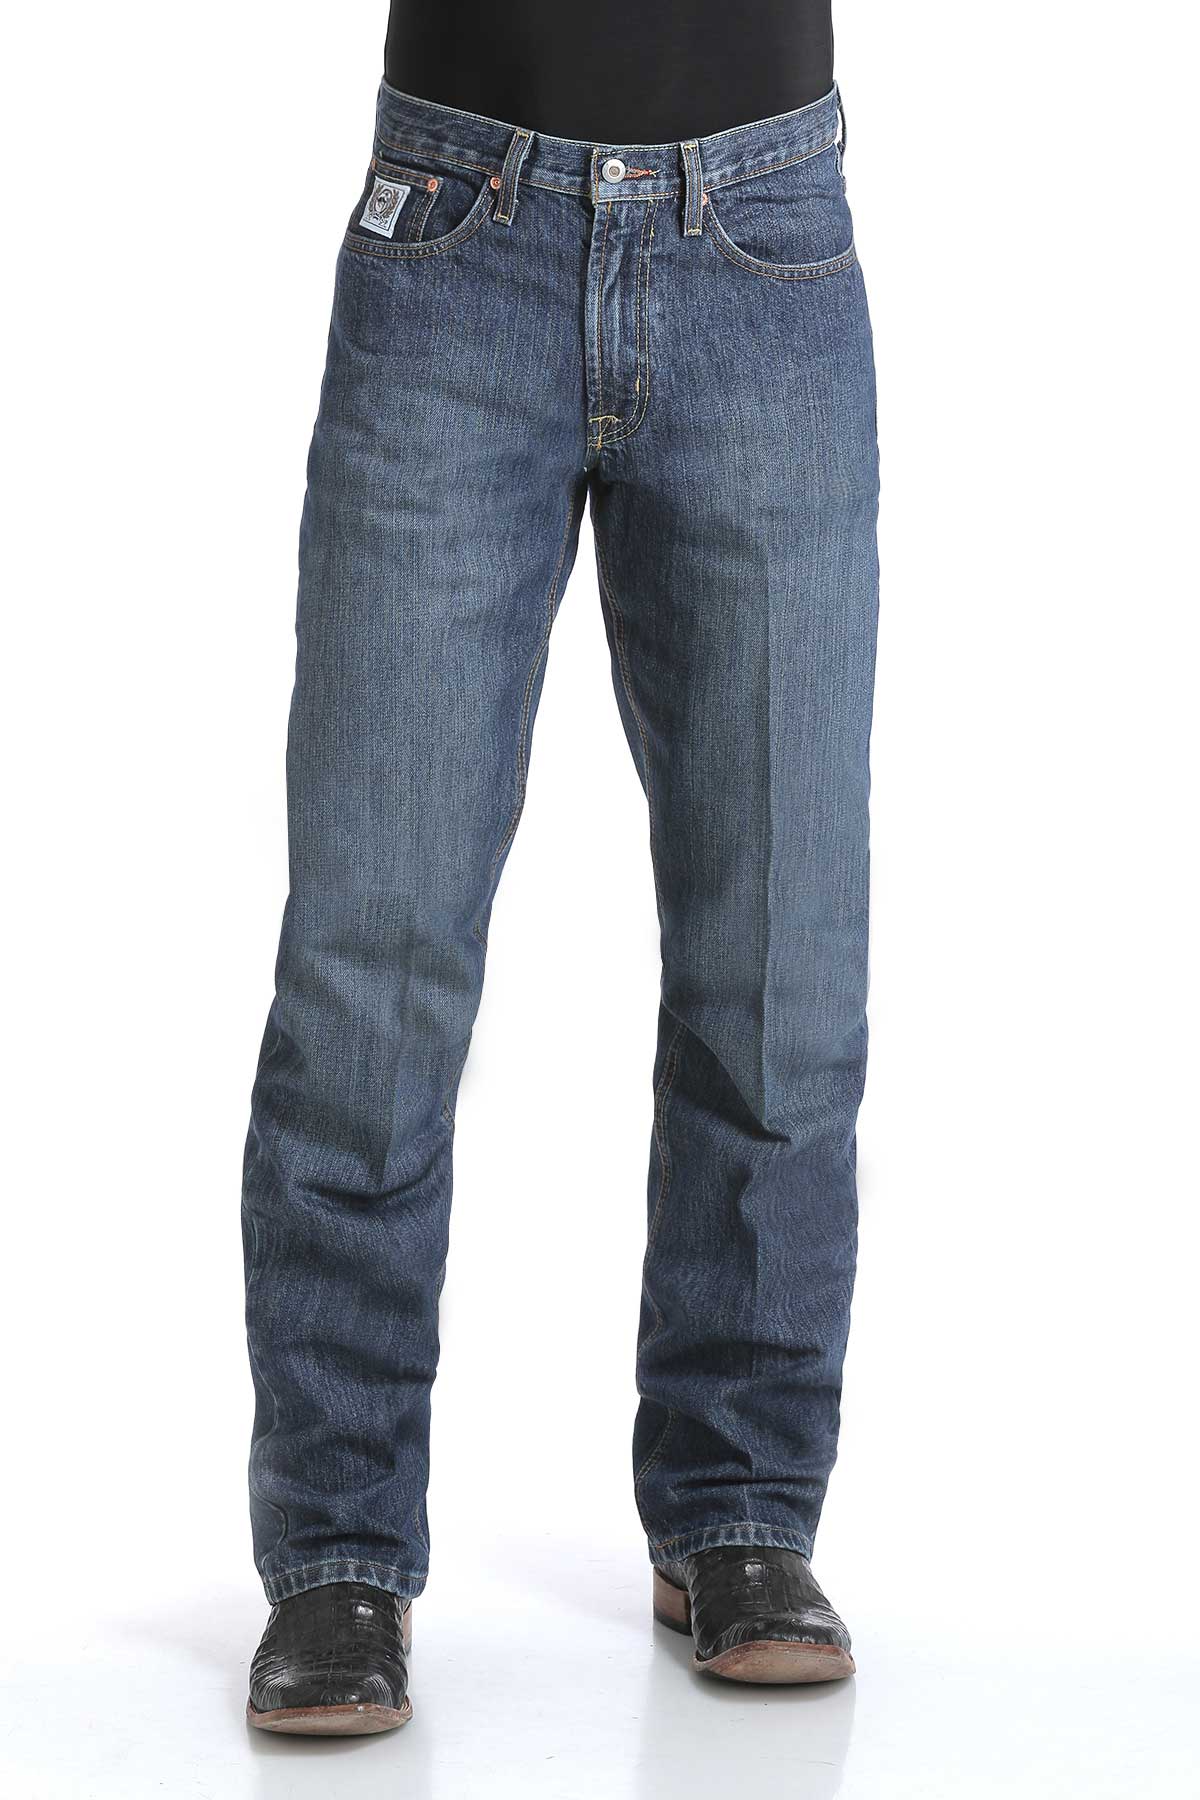 Cinch White Label Mens Jeans #MB92834013